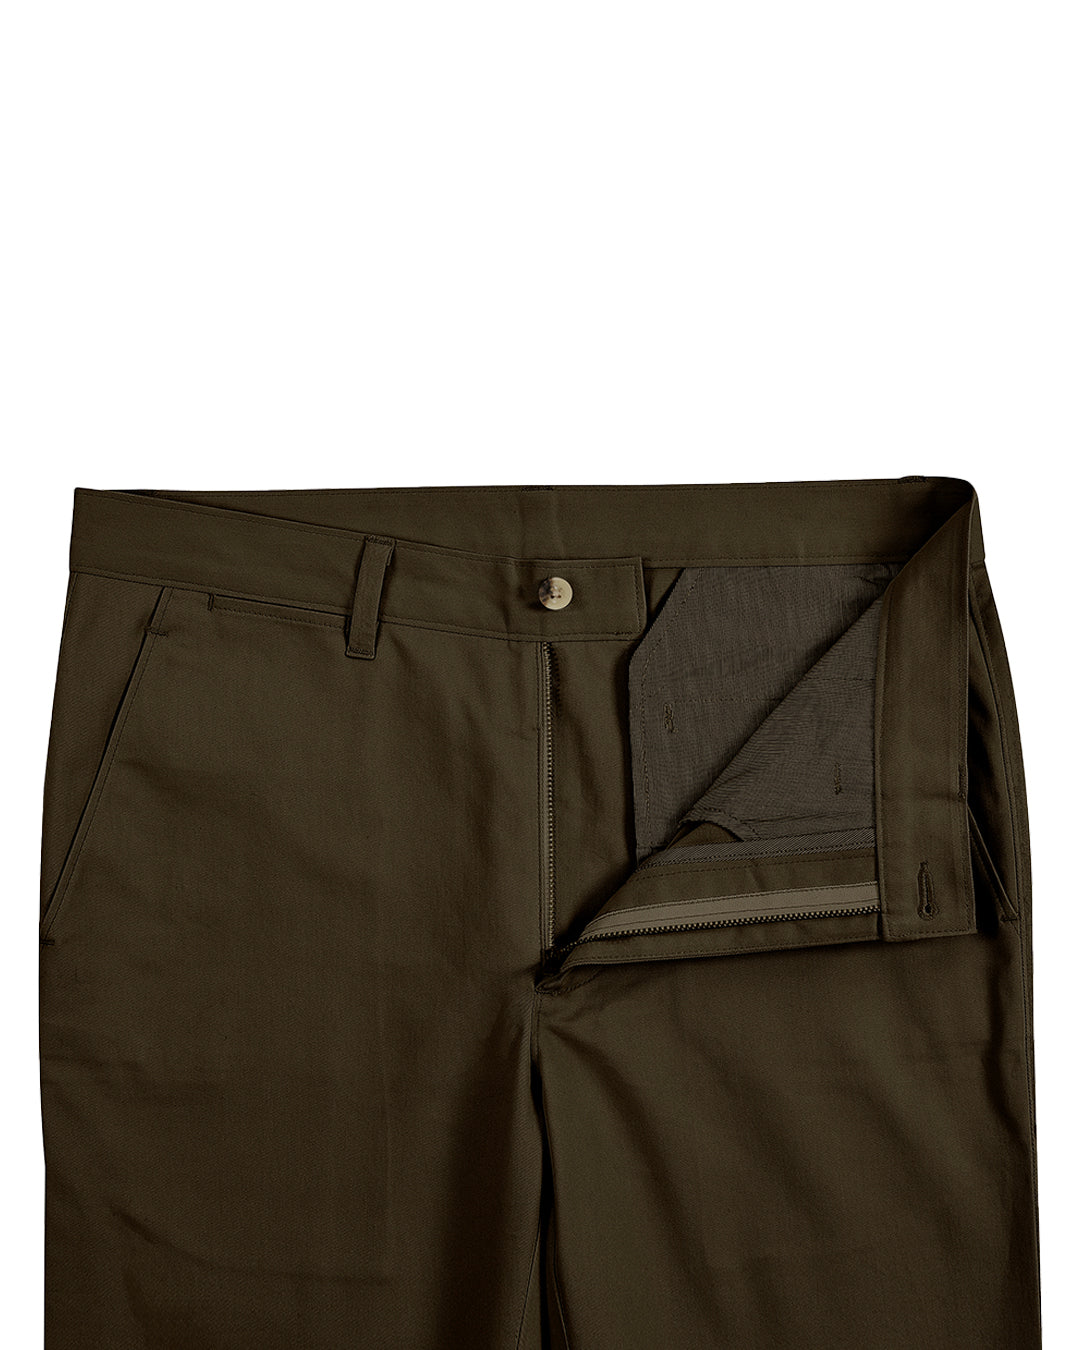 Front open view of custom Genoa Chino pants for men by Luxire in choco brown